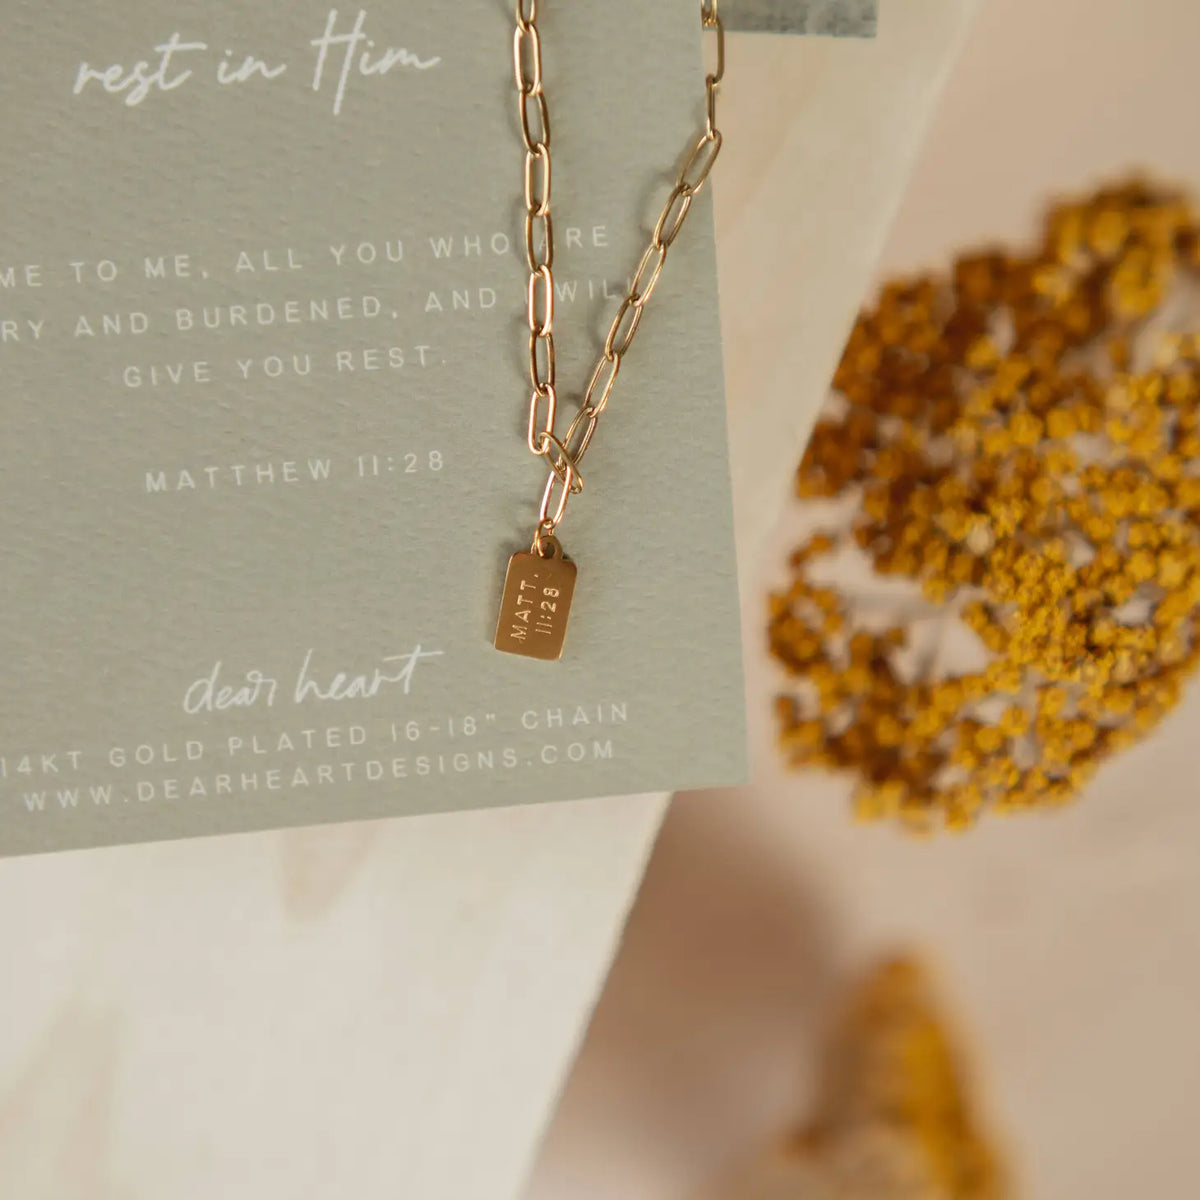 Dear Heart | Rest in Him Mini Tag Necklace